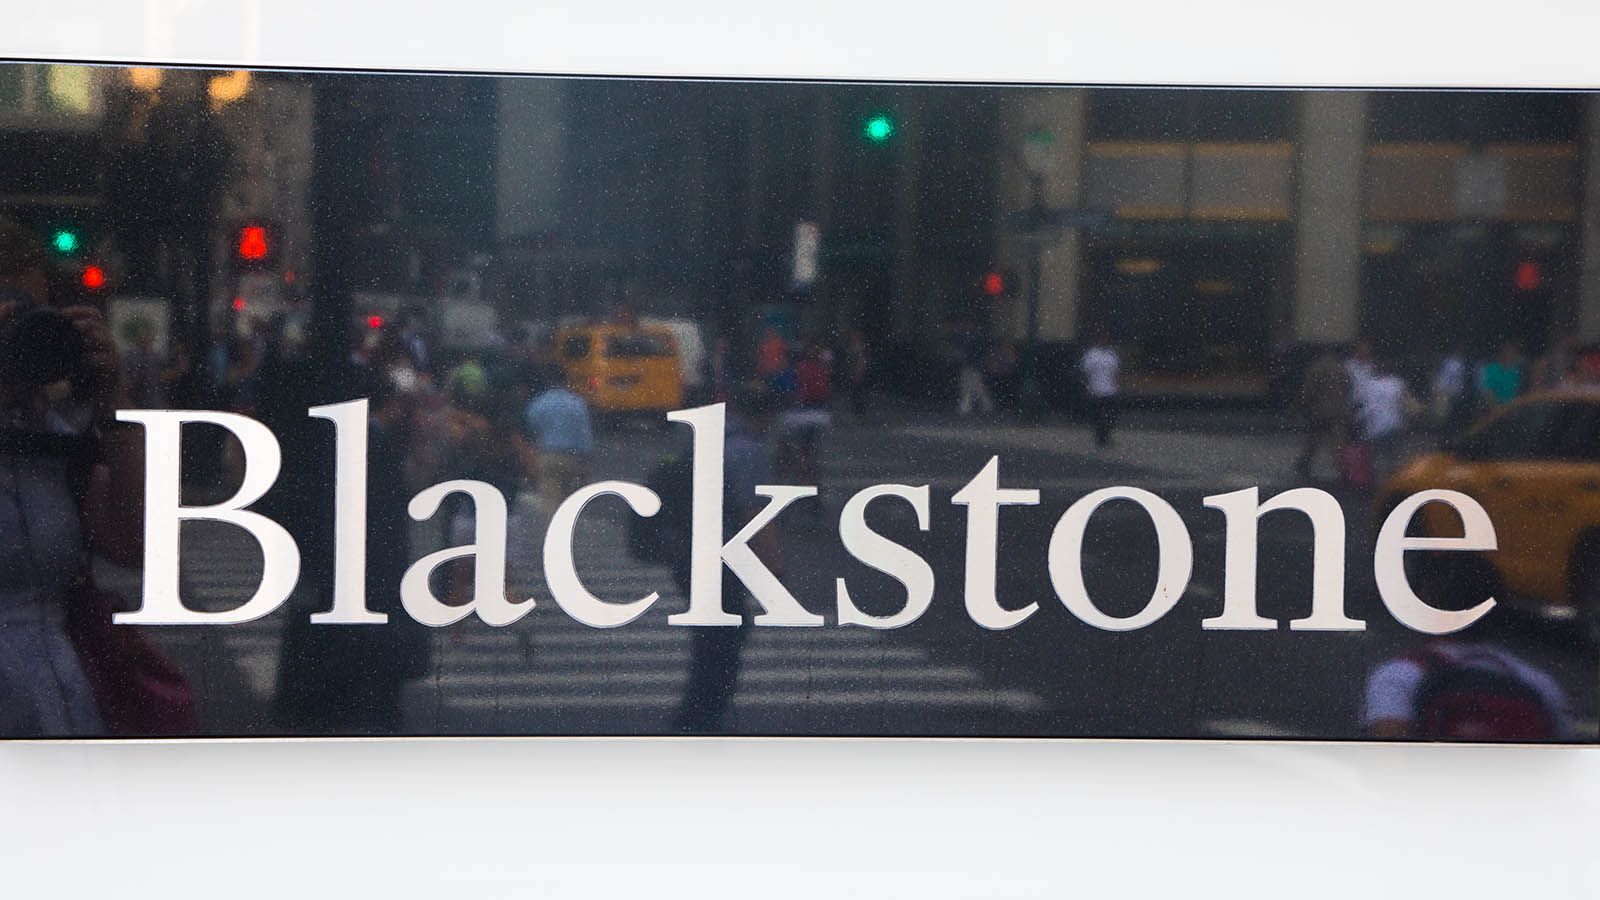 A sign for Blackstone (BX) hangs on a white wall.